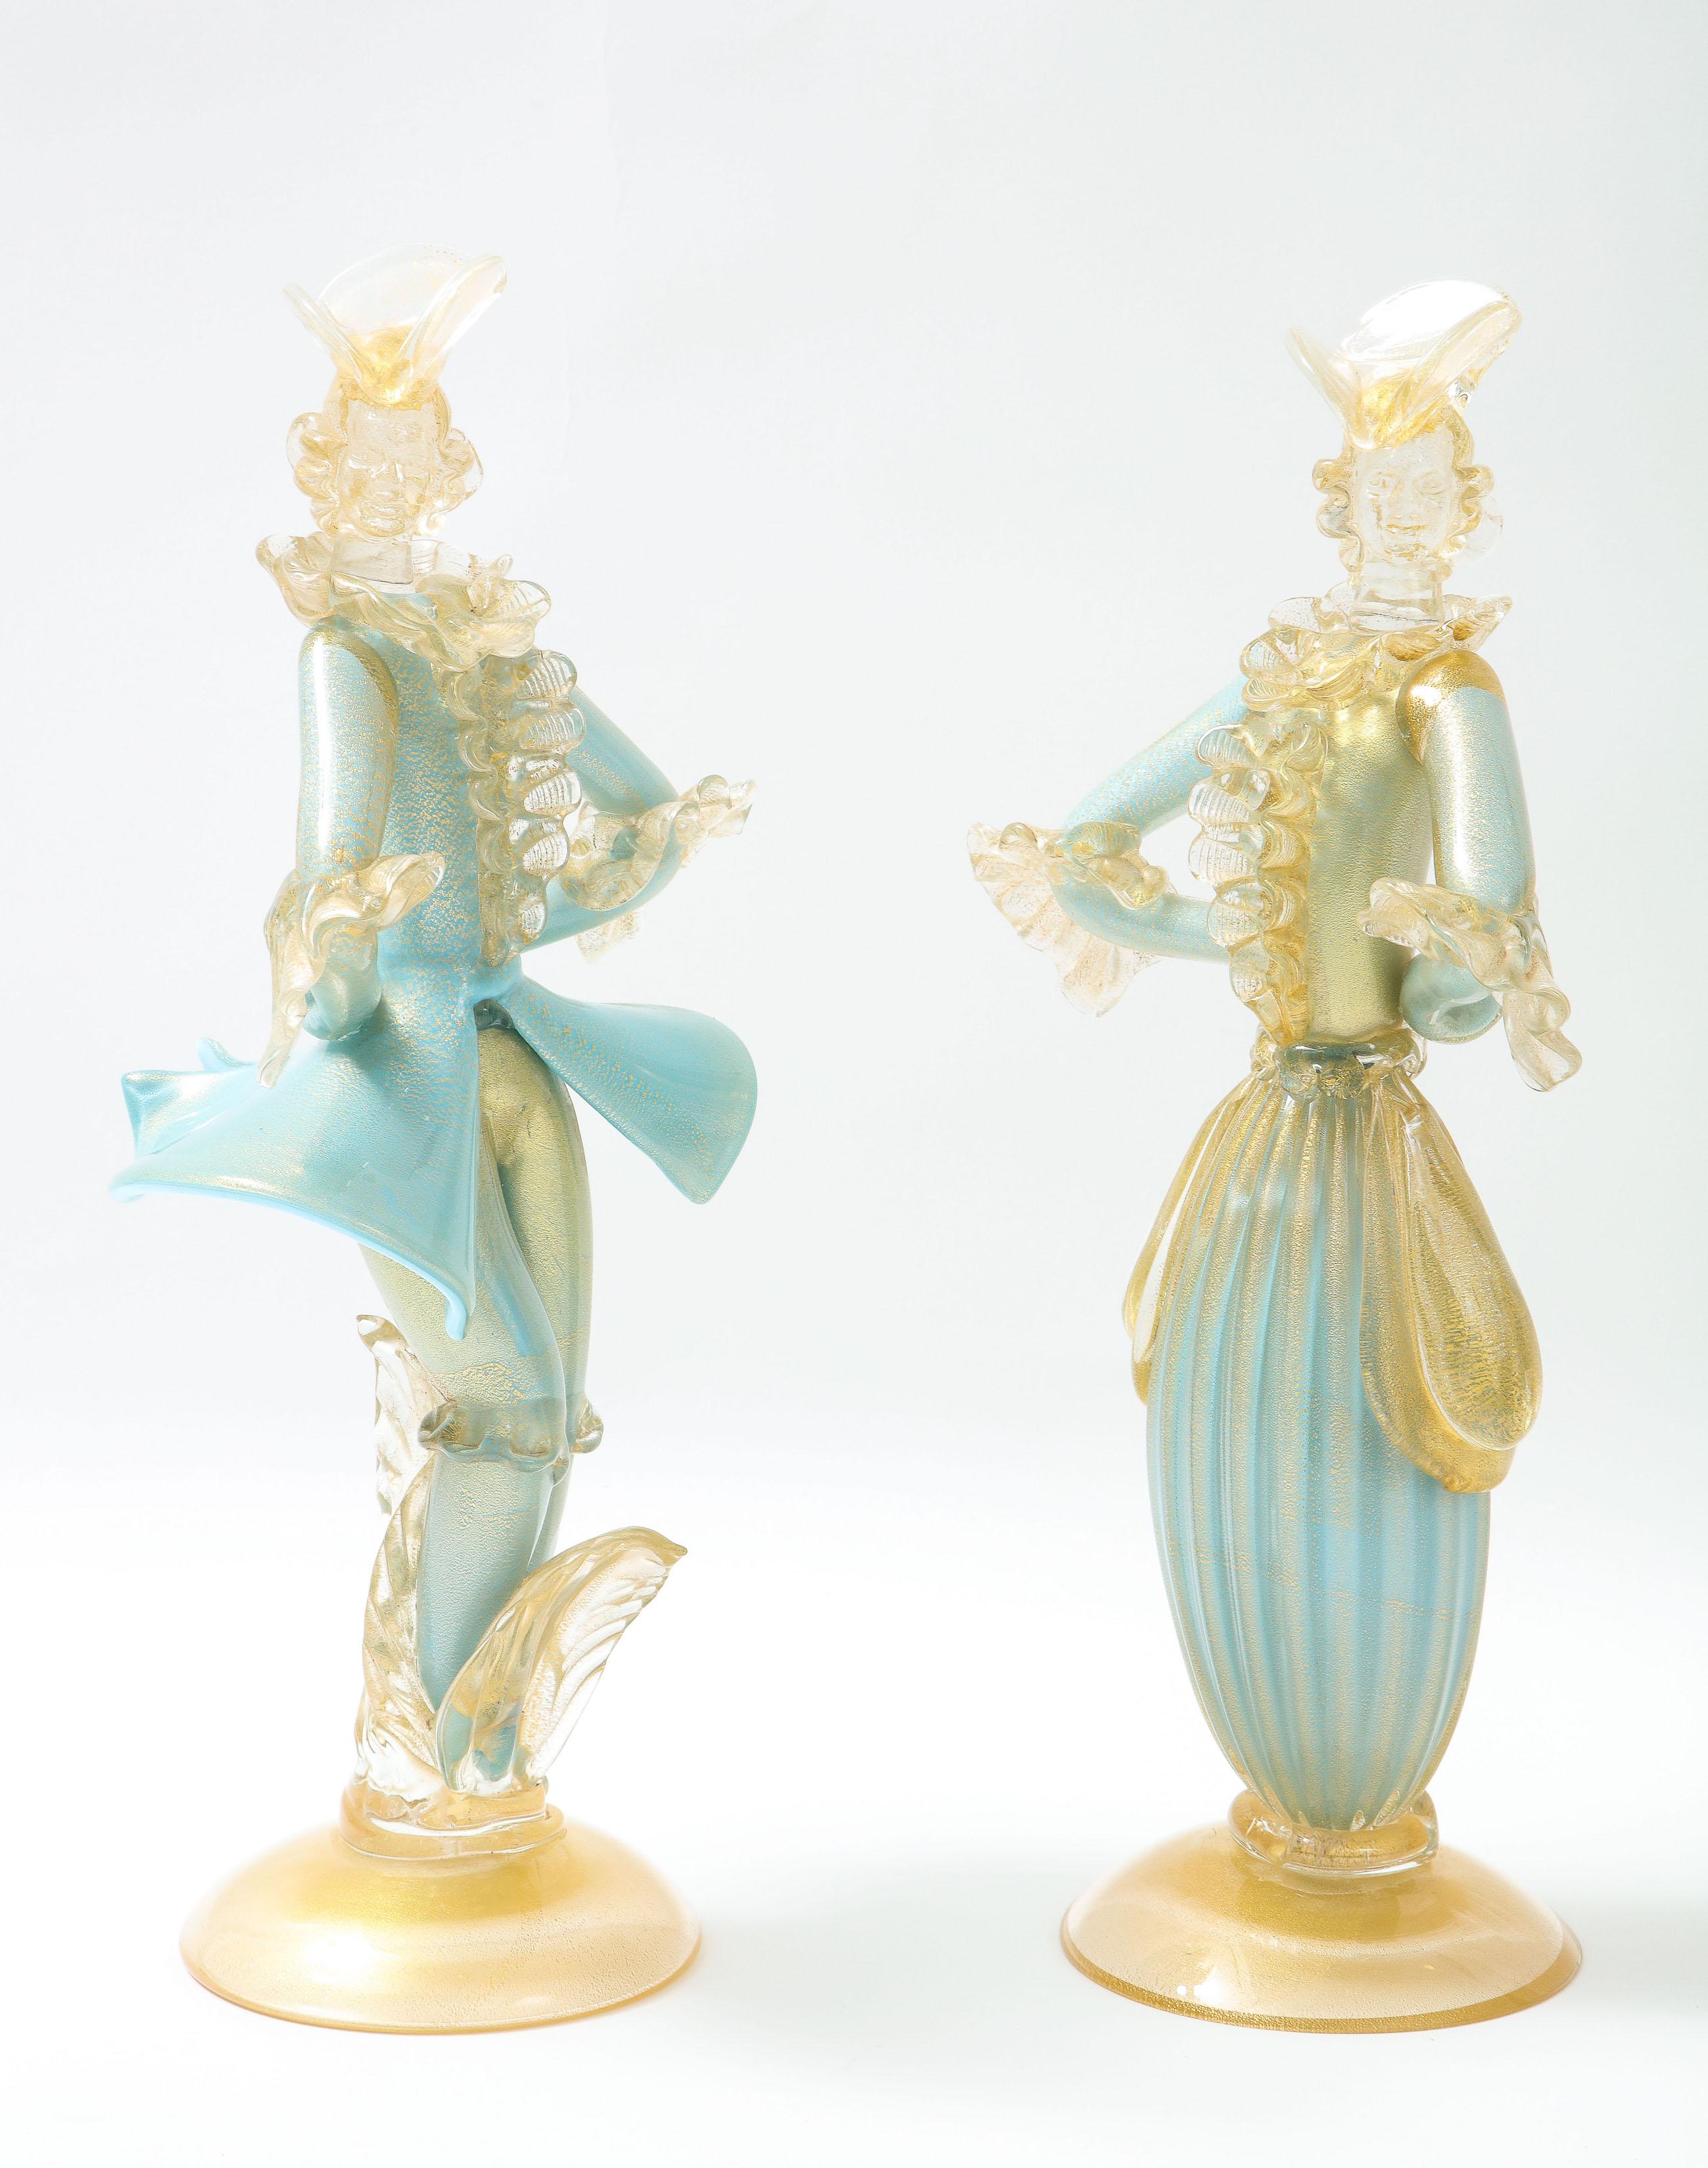 Pair of turquoise Murano glass costume figurines in the Louis XV style with ruffles by Seguso Vetri Arte with gold leaf circular base.